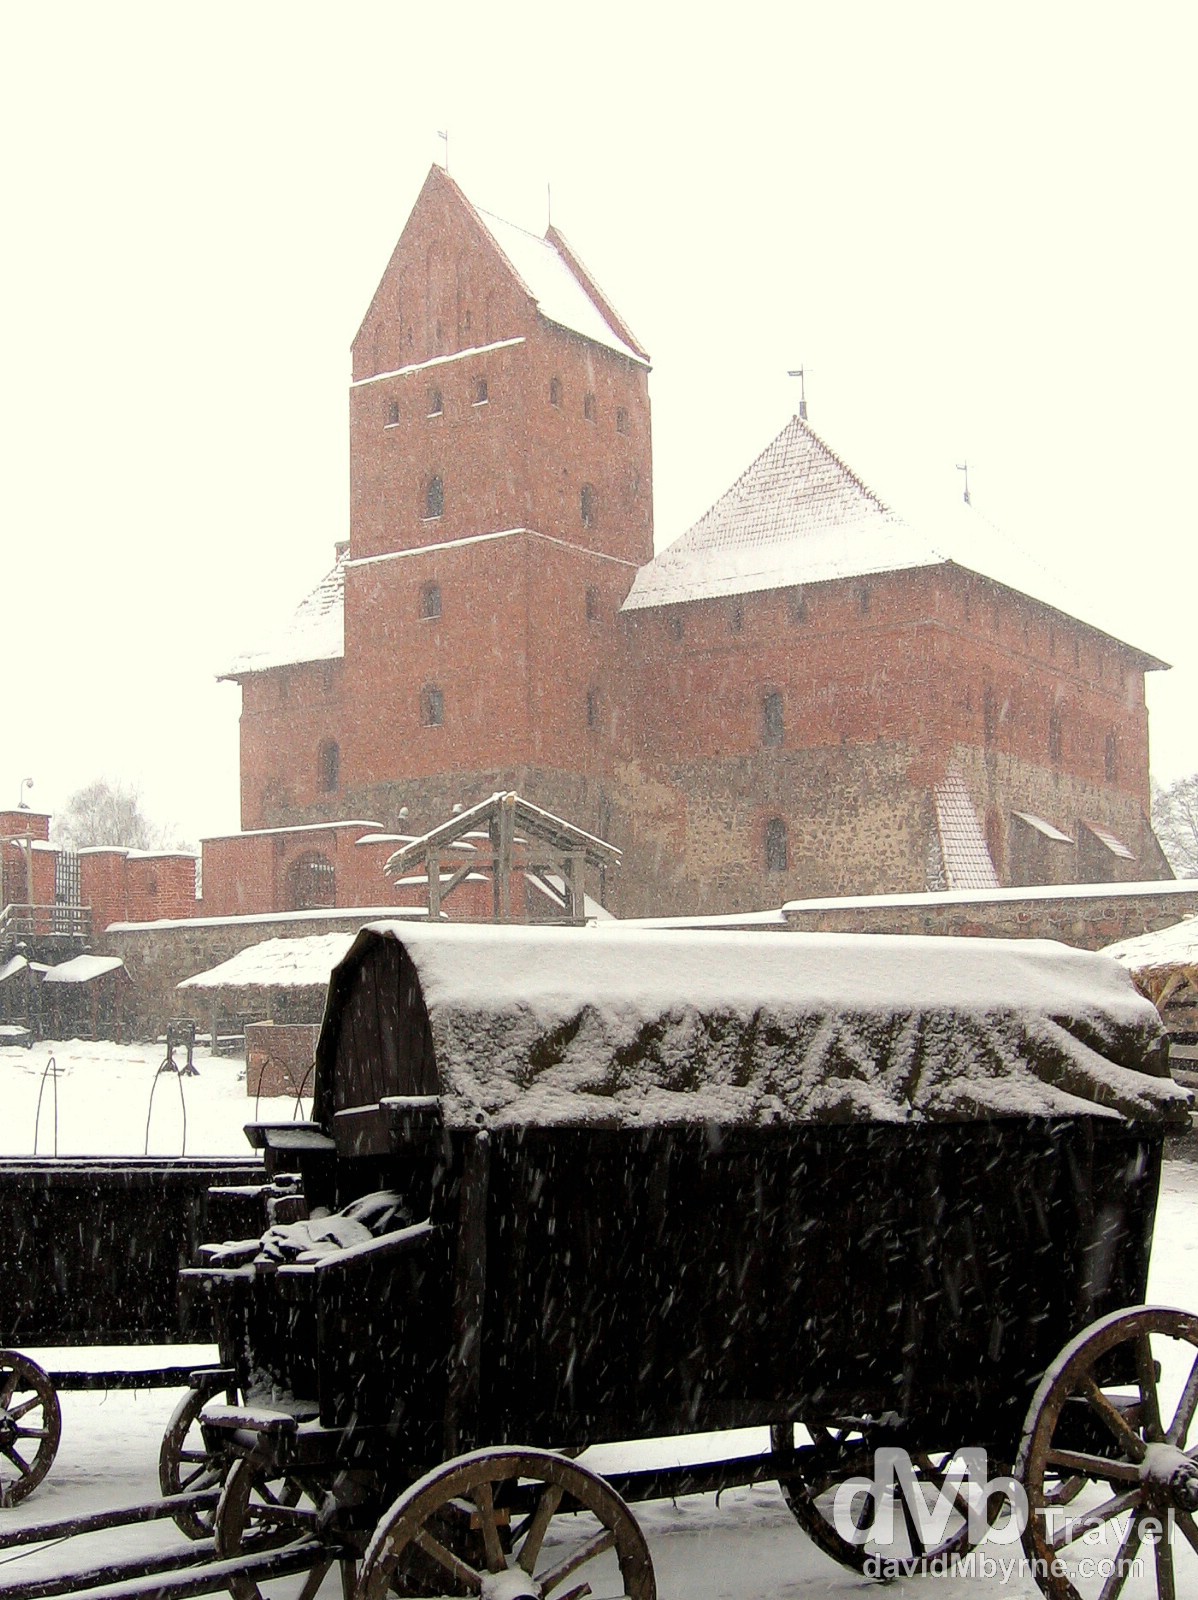 In the central courtyard of Trakai Castle during a heavy blizzard. Trakai, Lithuania. March 4, 2006.